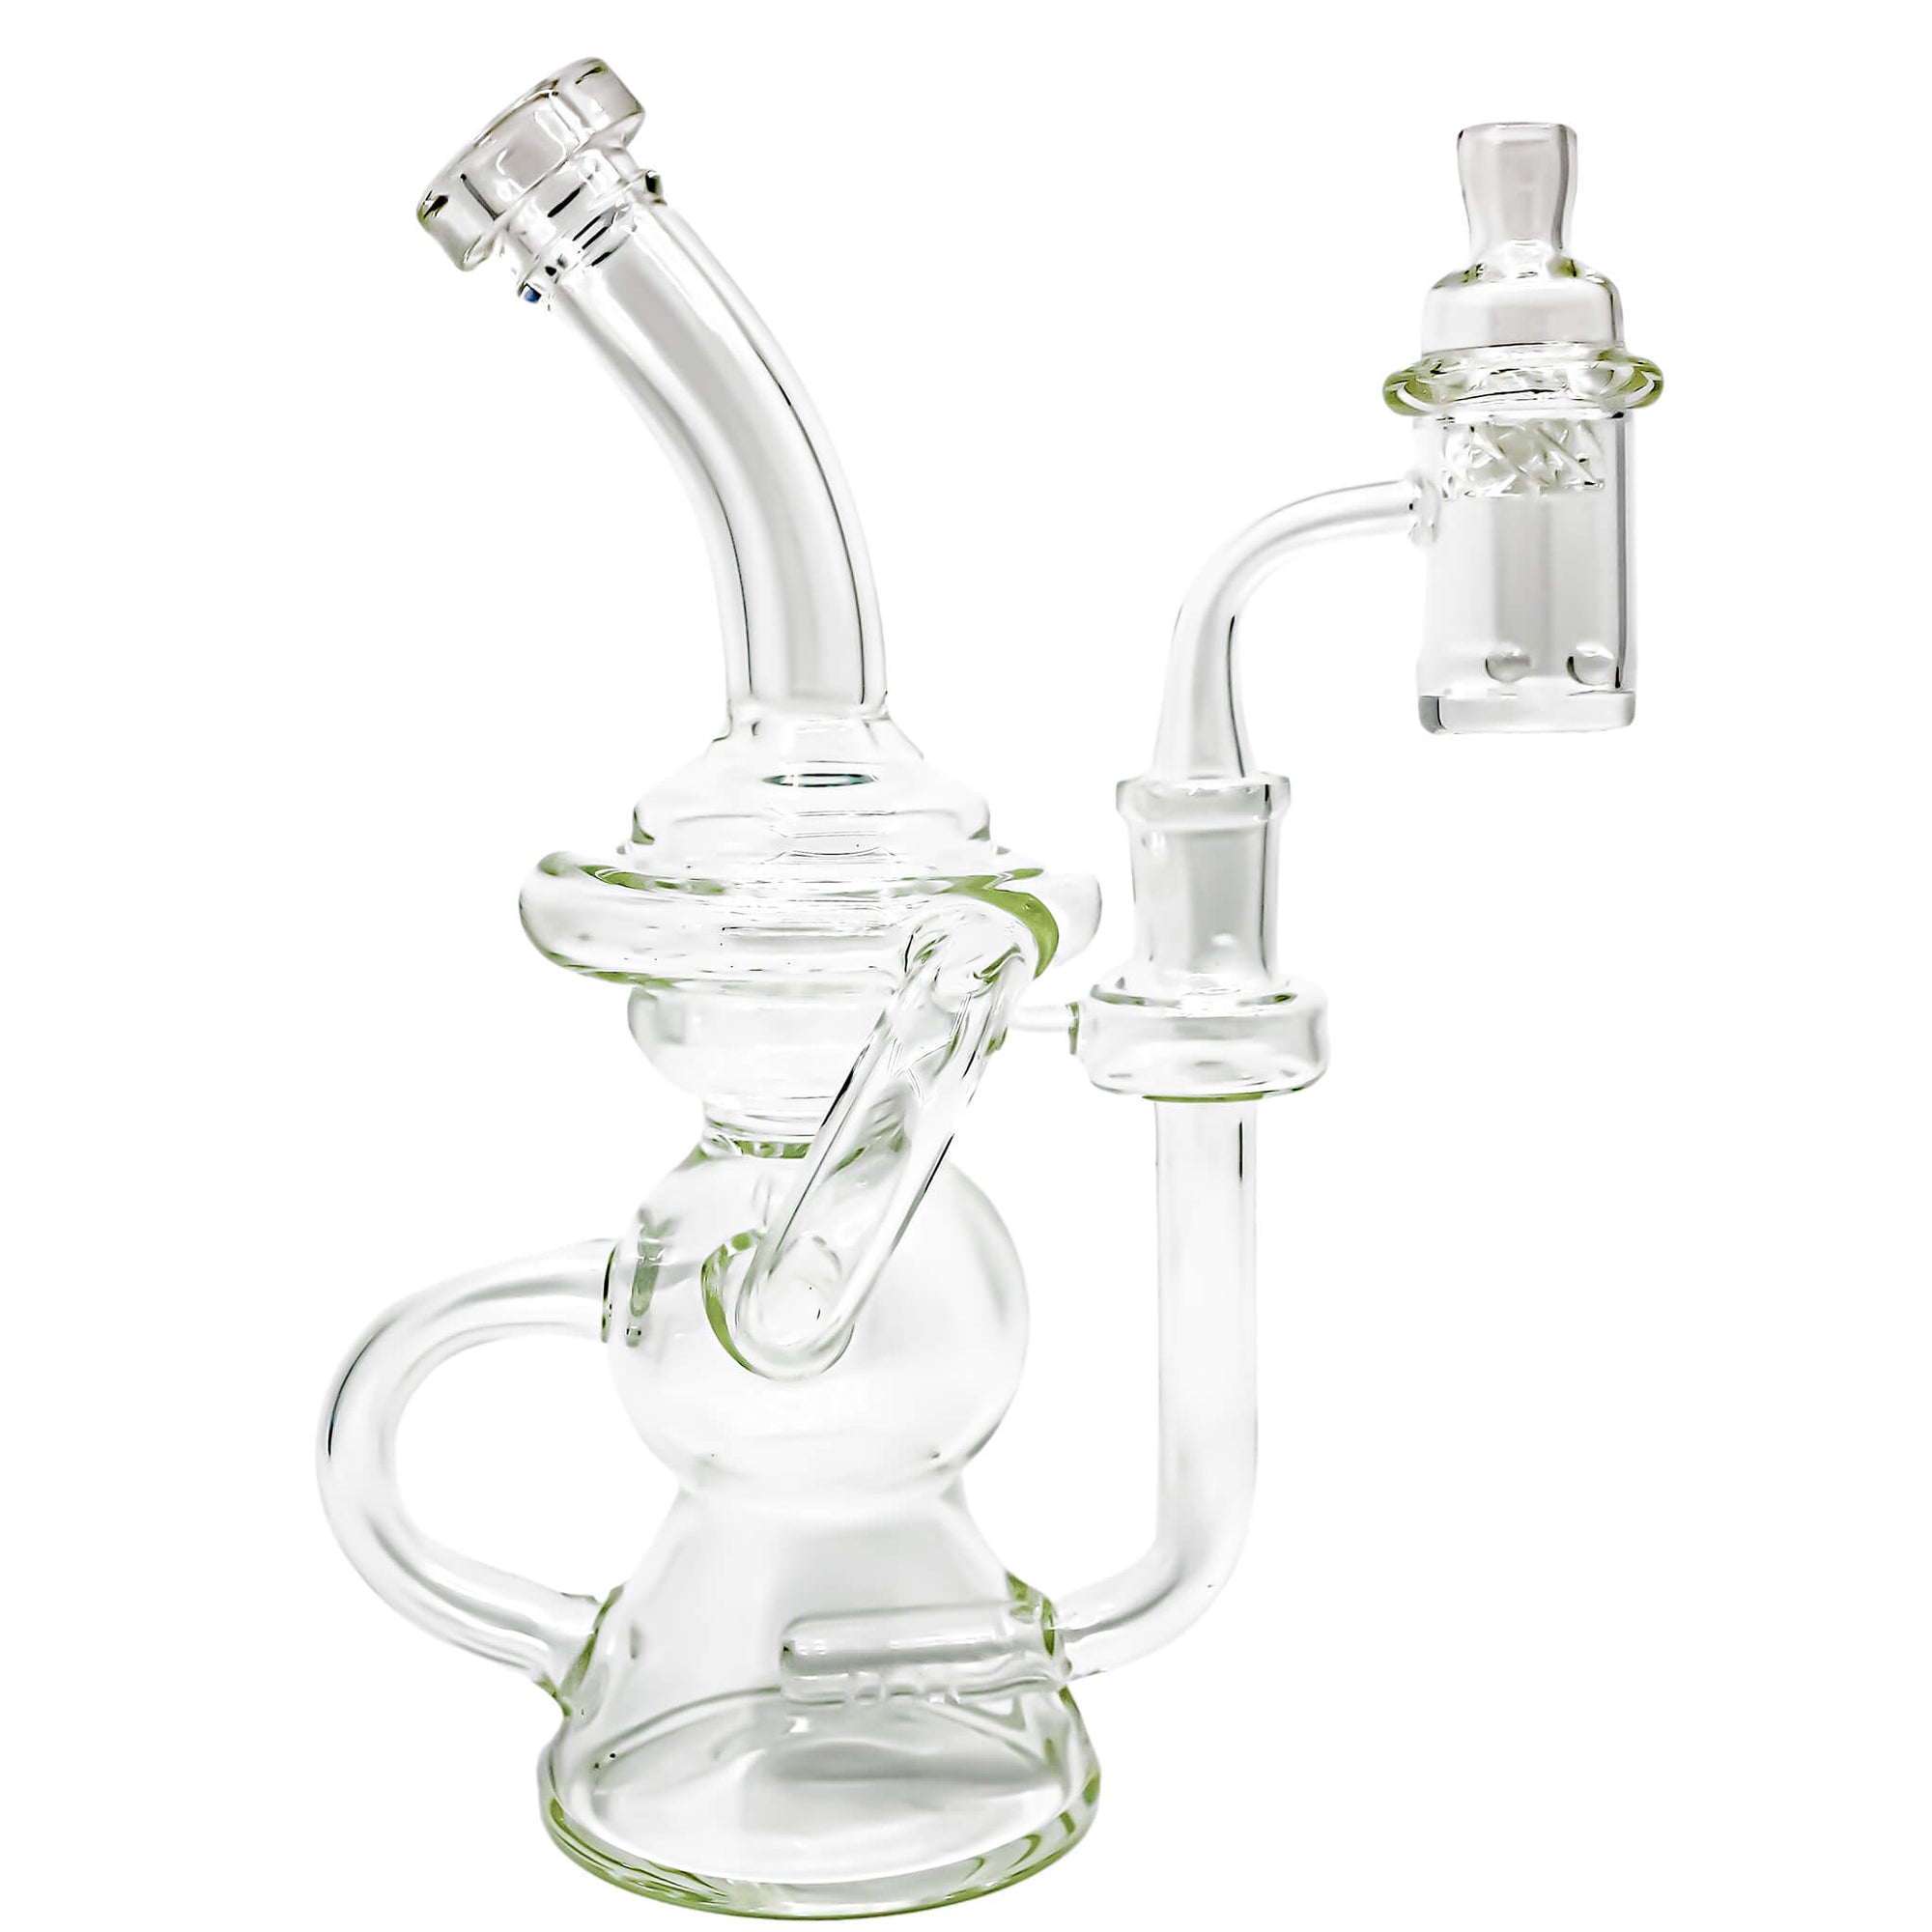 Vornadic Klein Recycler 25mm Dab Kit | Dab Kit Profile View | the dabbing specialists